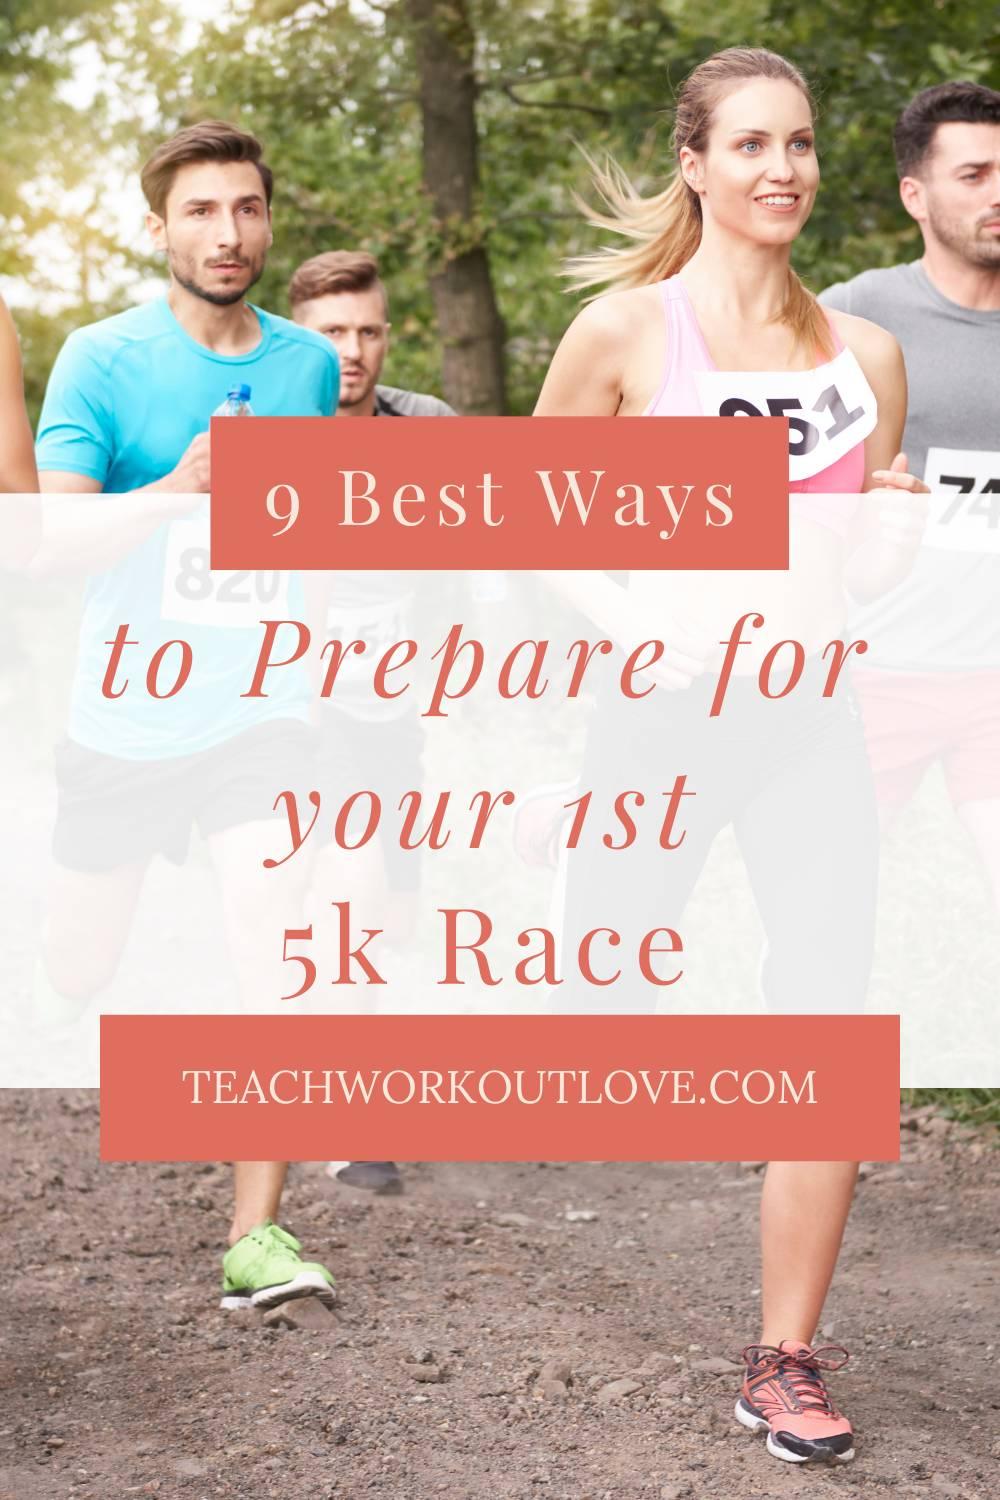 Running a 5K race is a worthwhile goal if you’re new to the running scene. Here are the best tips to start preparing for your first 5K race!